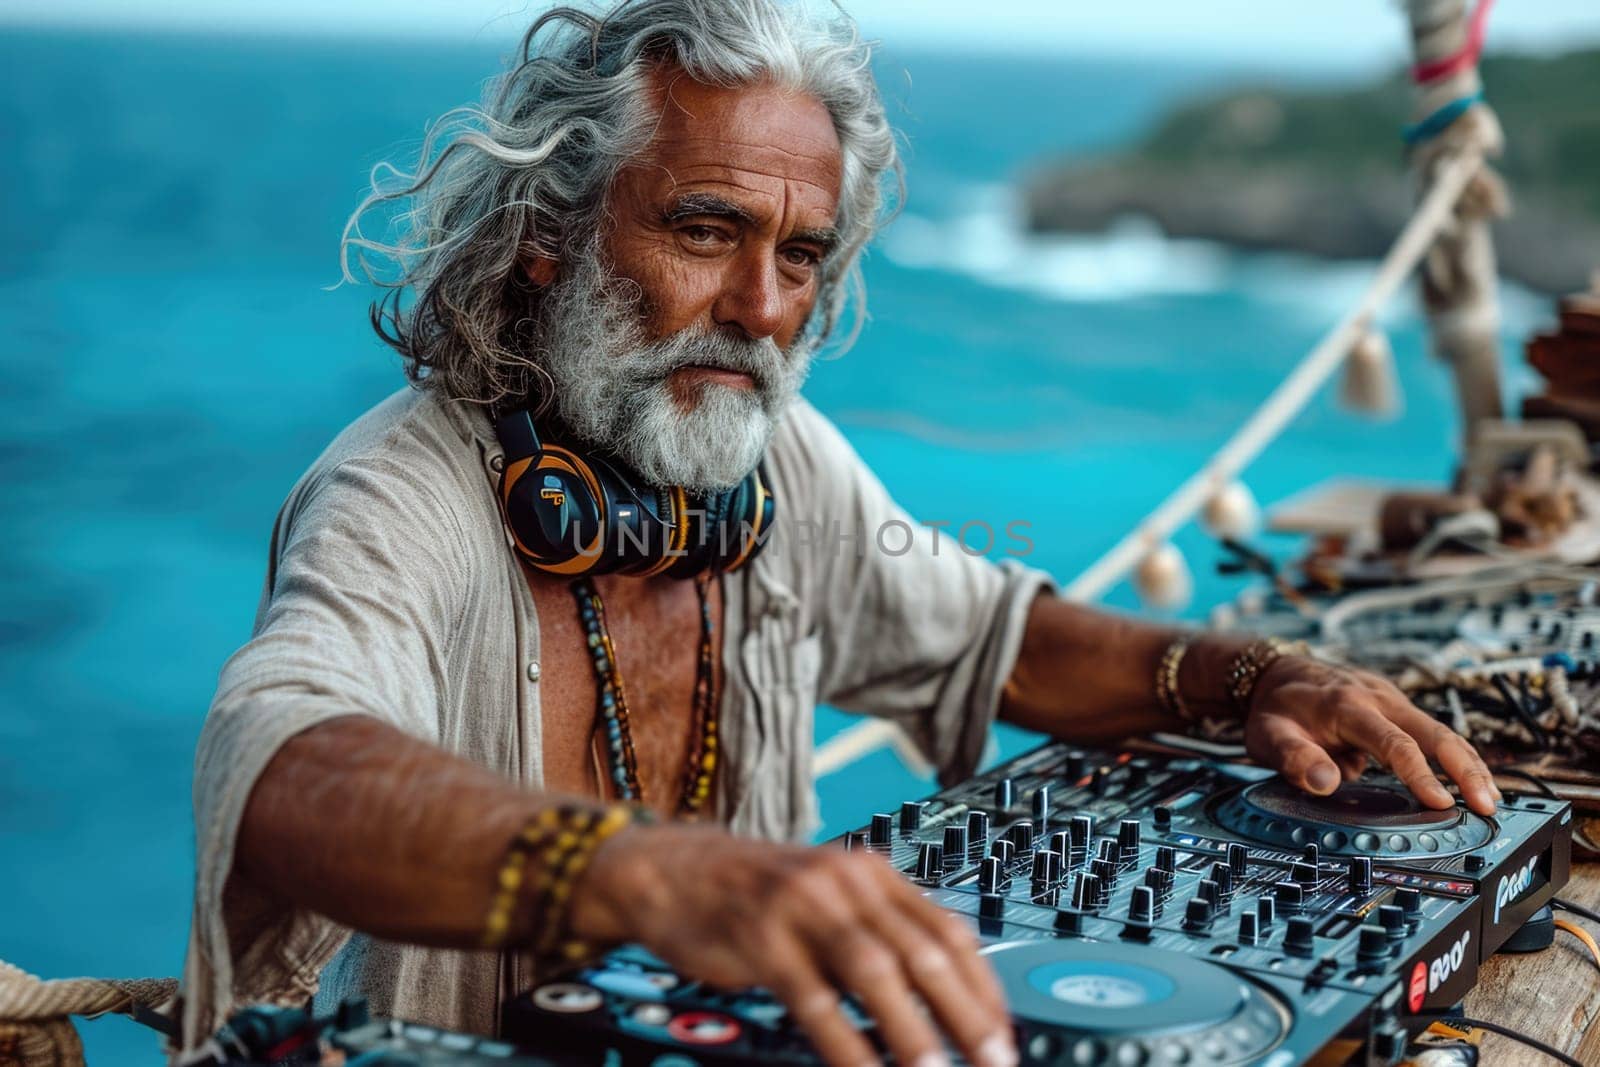 Gray-haired DJ captivates with melodies by the seashore by Yurich32